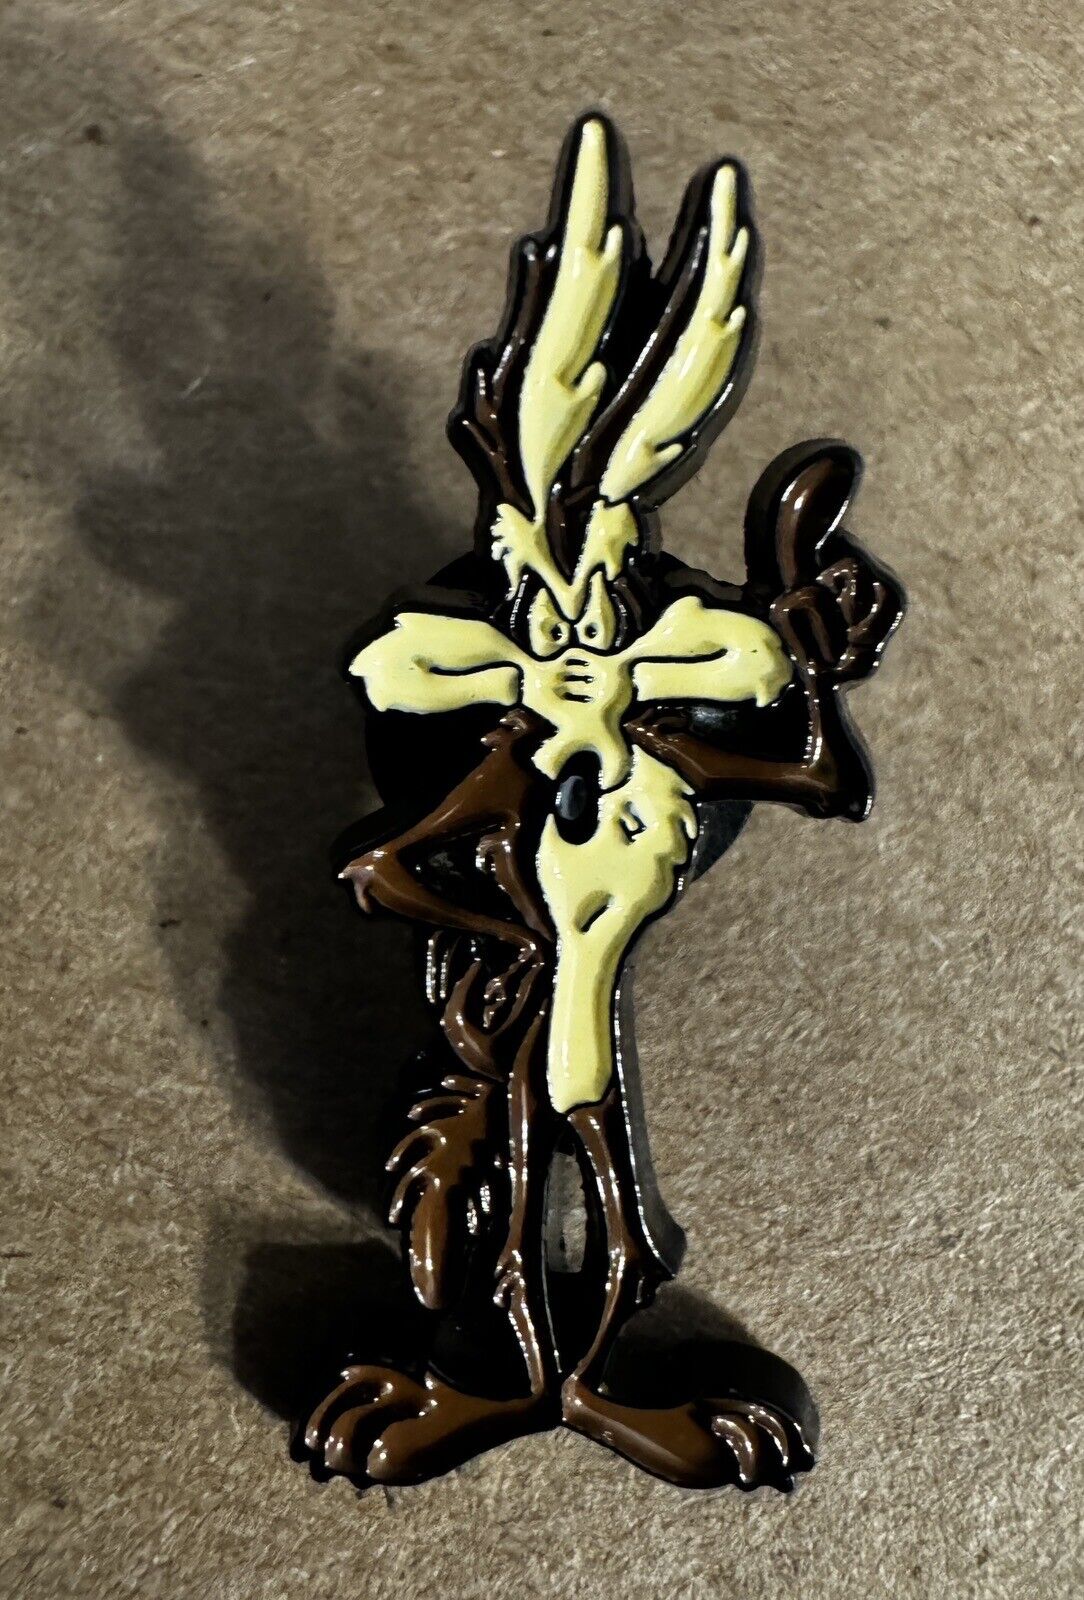 Wylie Coyote Looney Tunes Lapel Pin For Hats , Shirts , Vests , Or A Gift